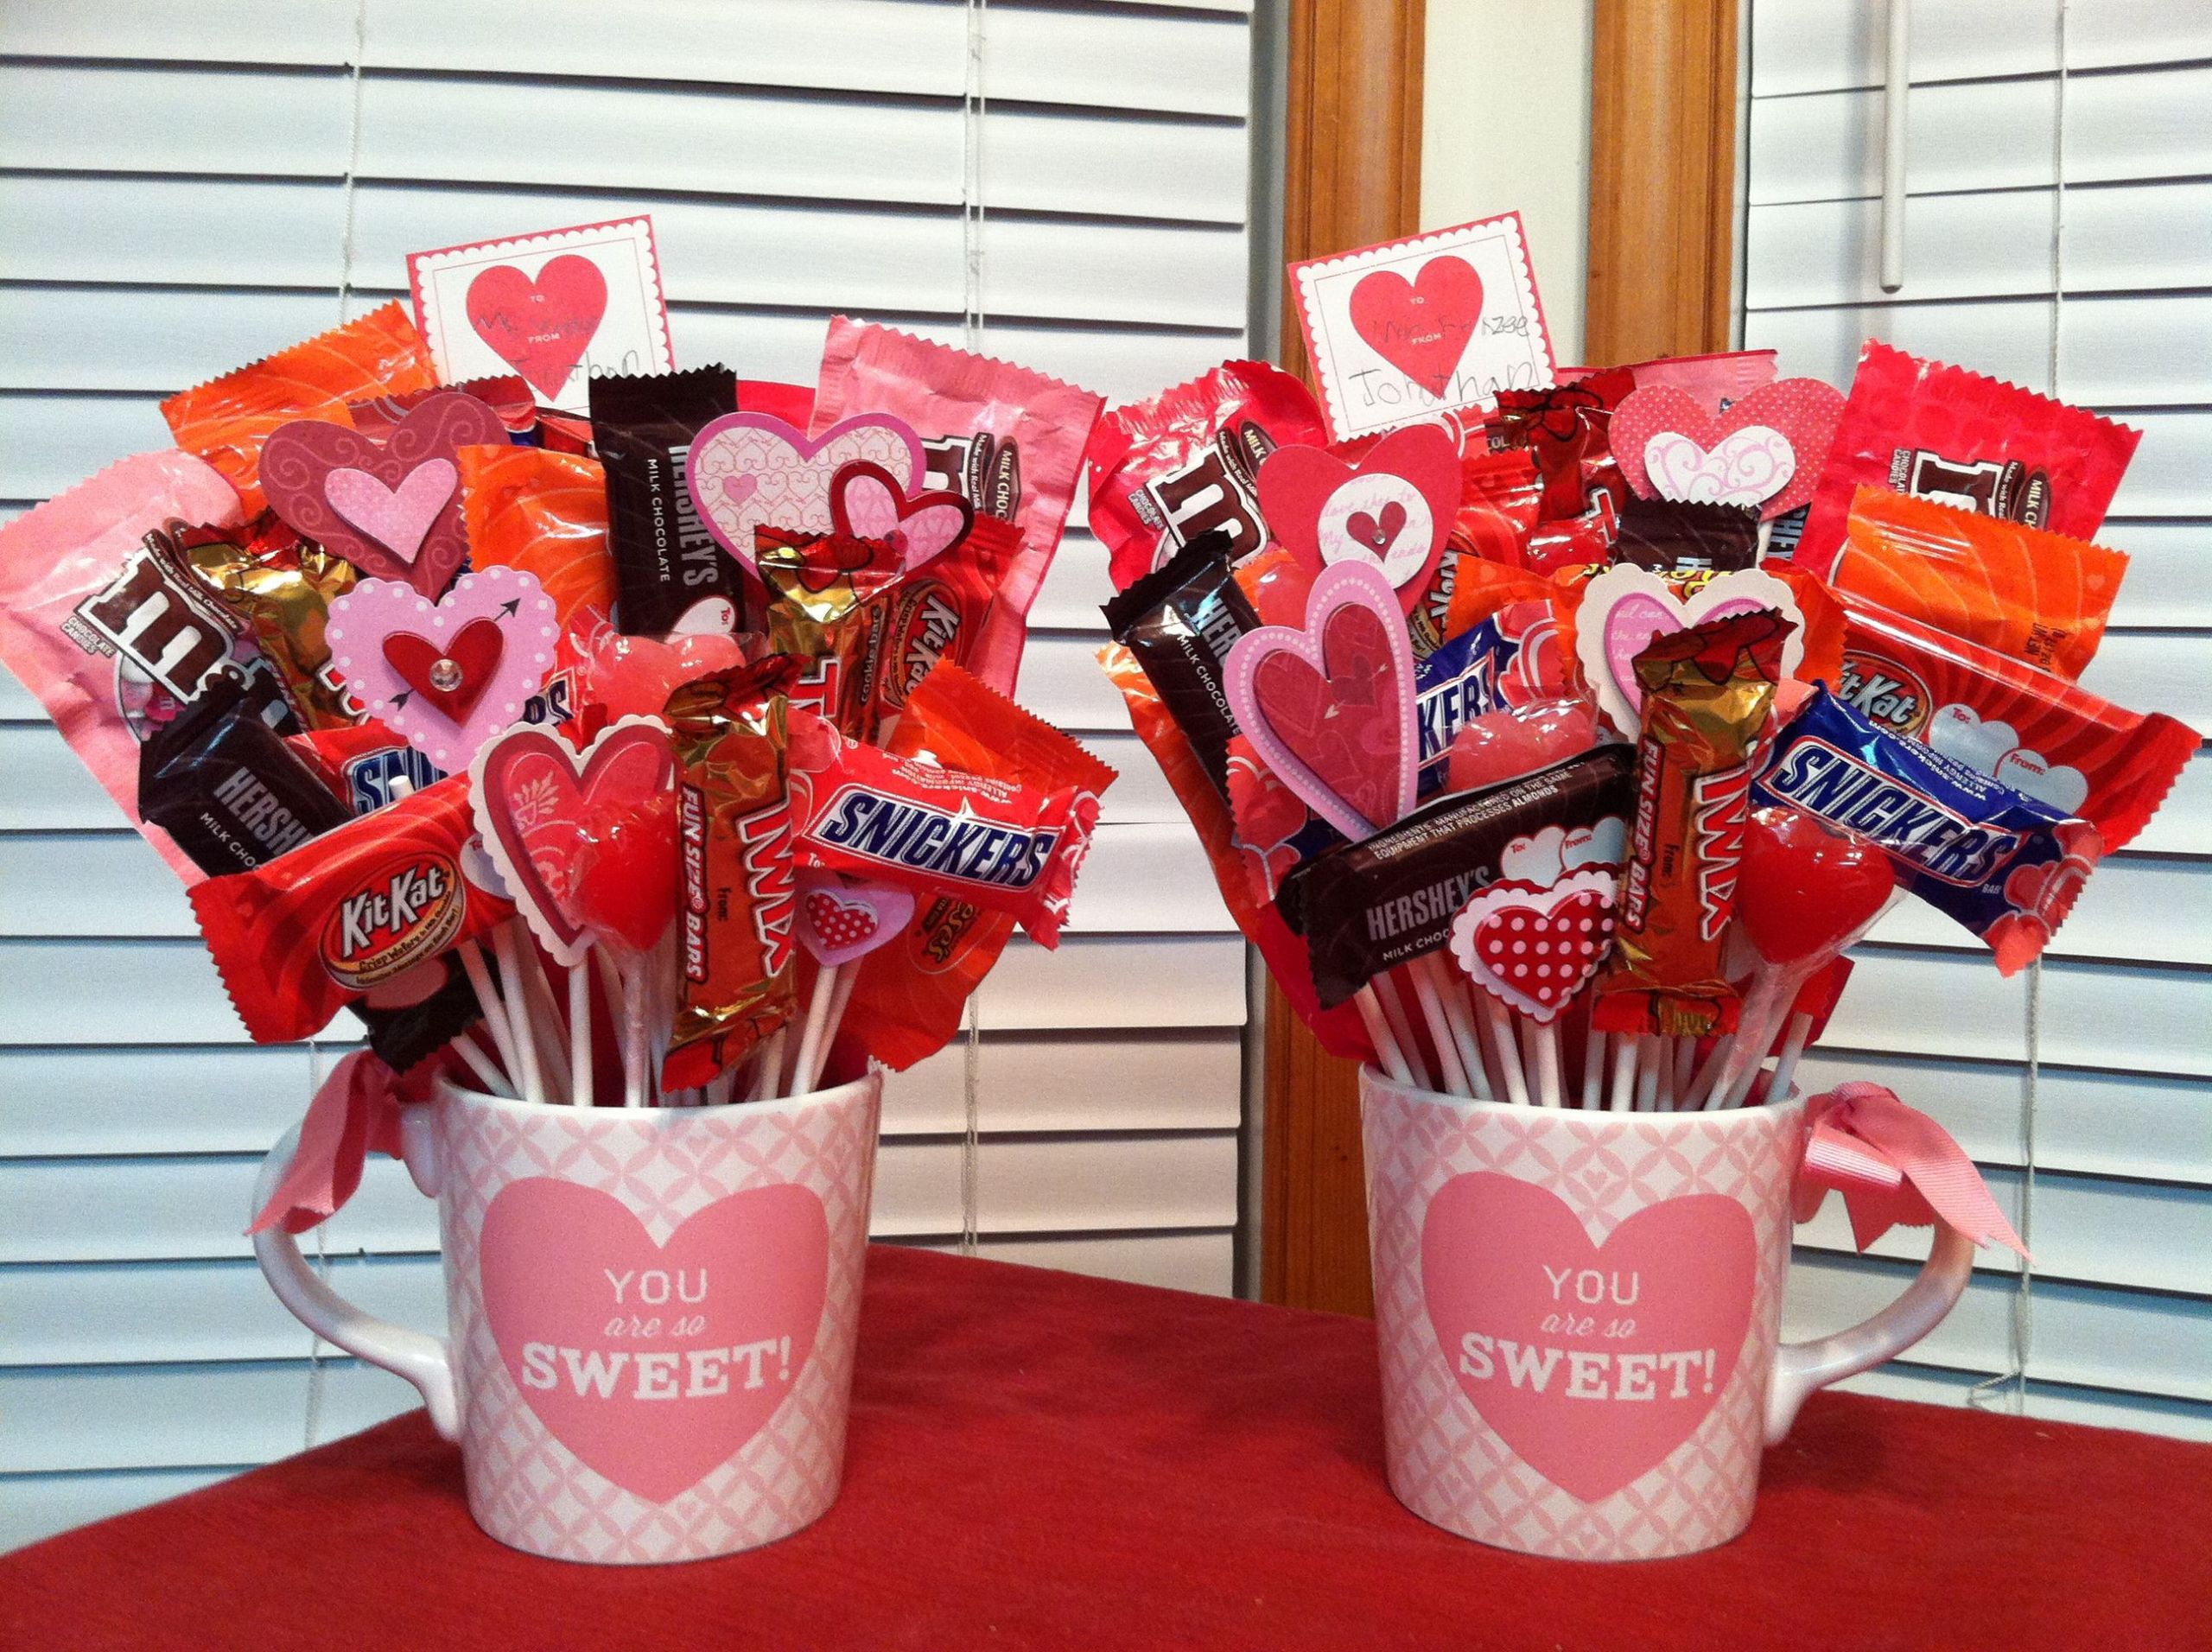 Valentines Candy Gift Ideas
 Learn how to make candy bouquets – Candy Bouquet Designs